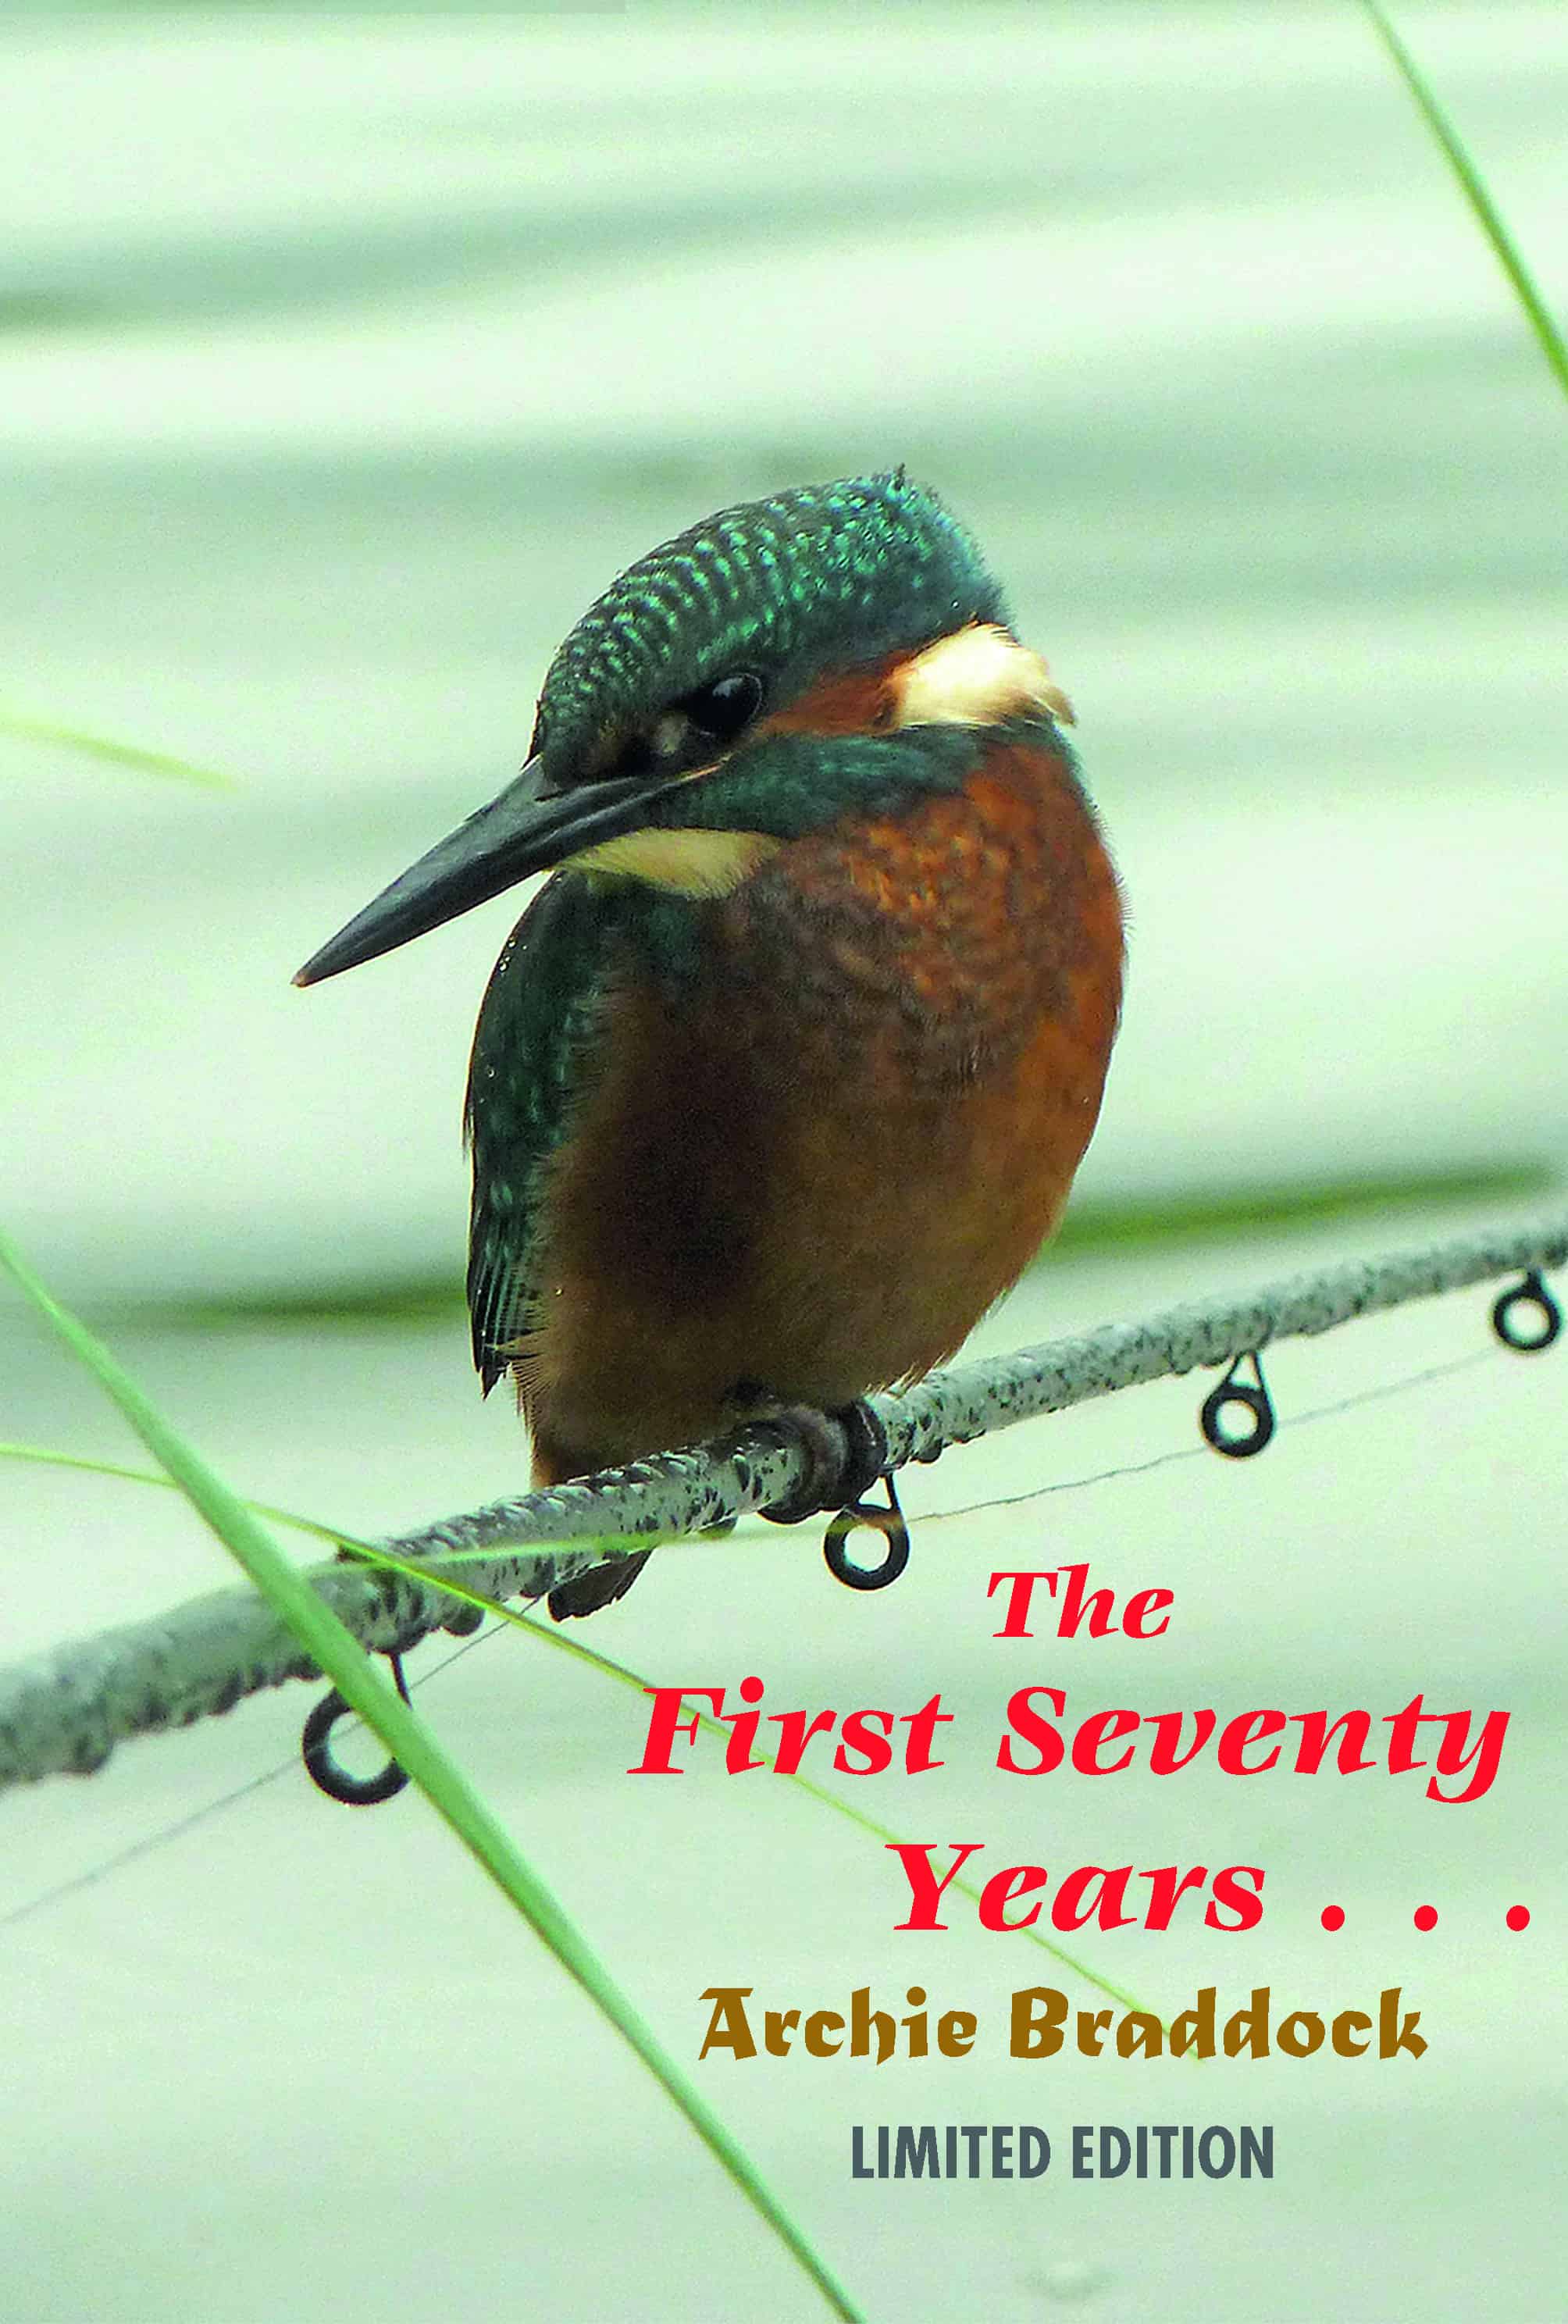 Book Review﻿ – The First Seventy Years – Archie Braddock